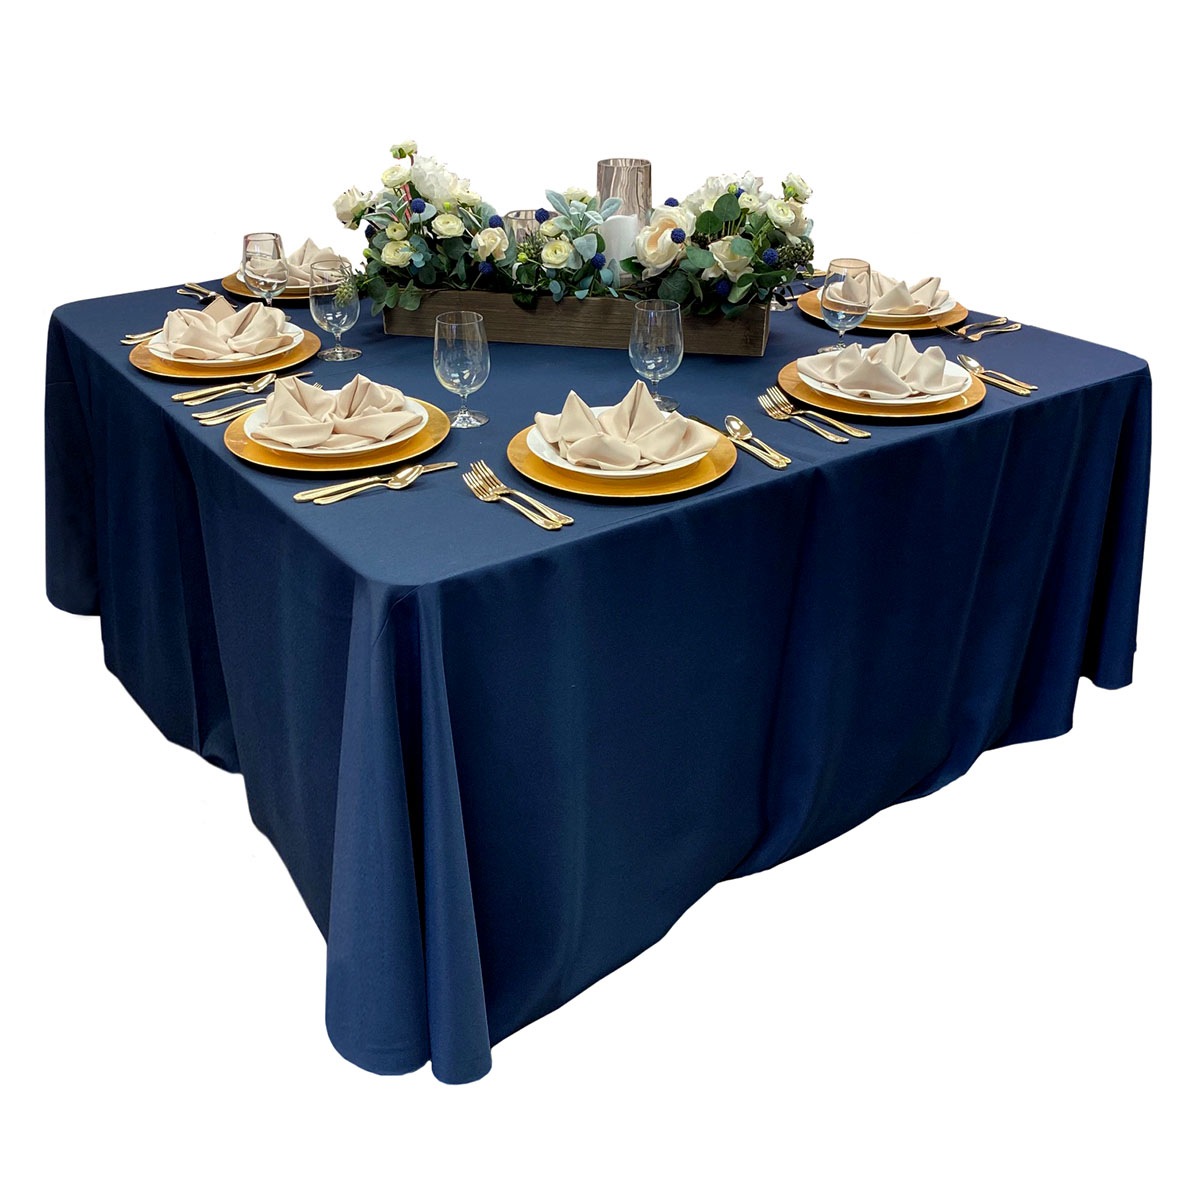 Tablecovers/Napkins Good Condition-FOR SALE